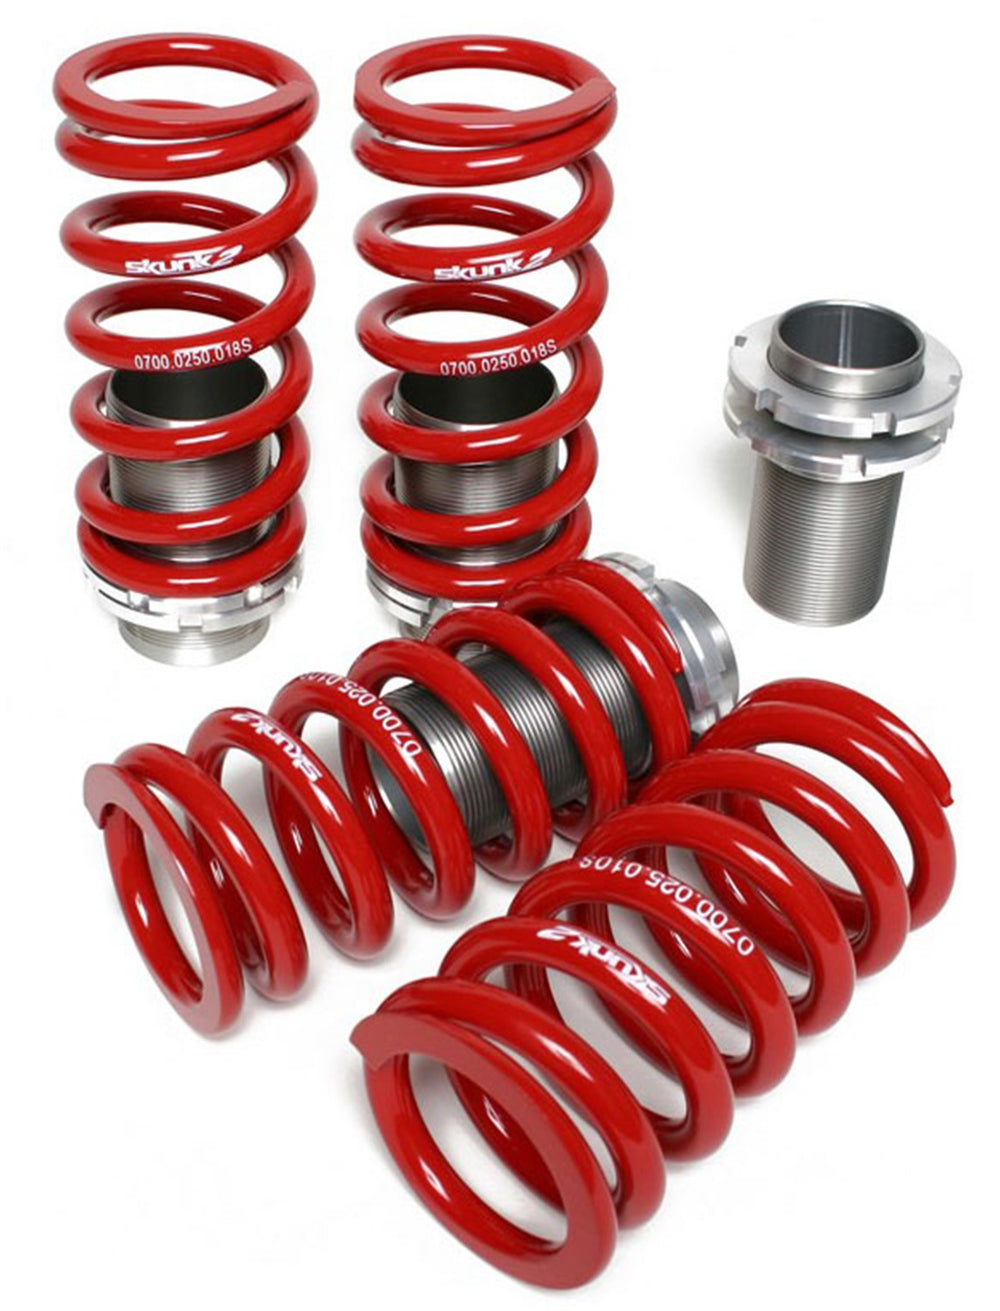 Skunk2 Drag Launch Adjustable Sleeve Coilovers Red 89-00 Honda Civic